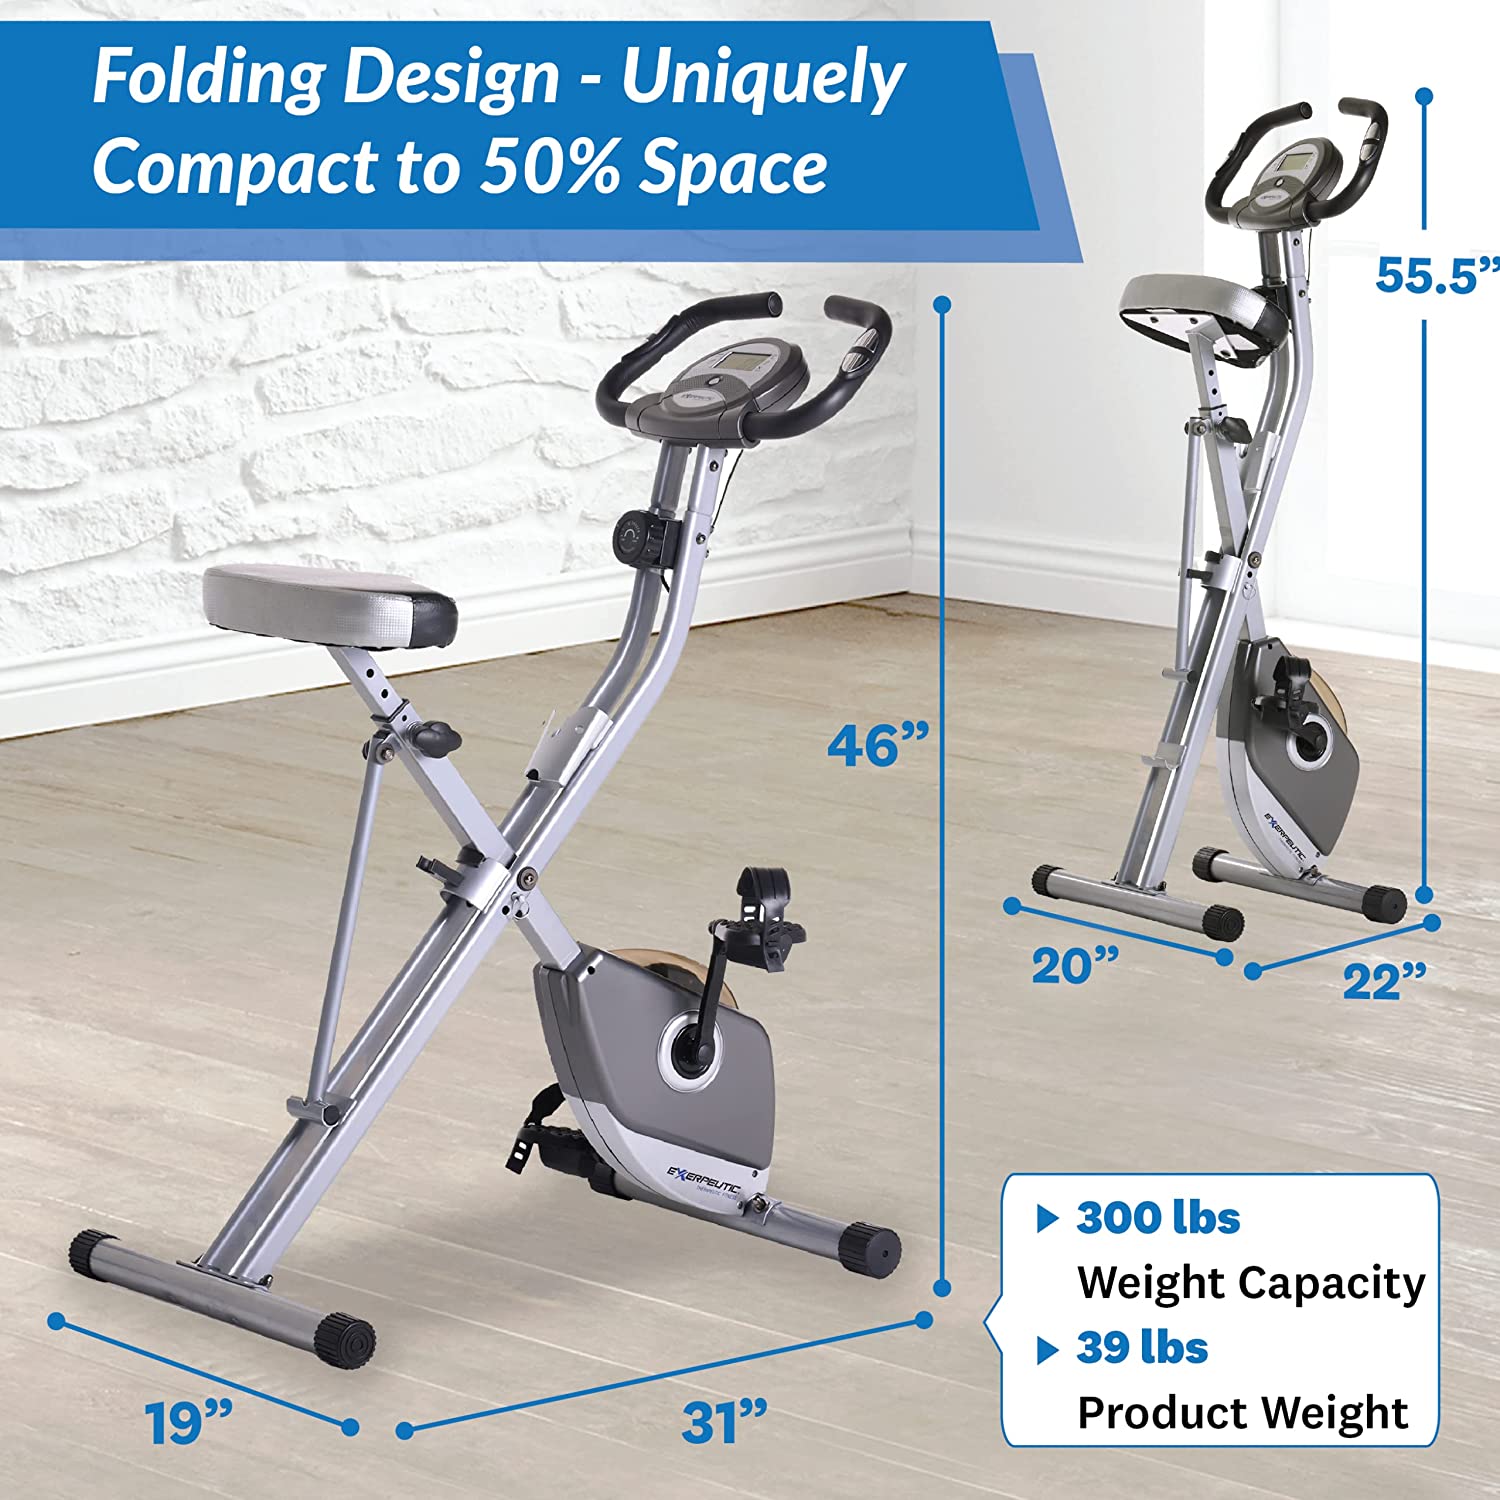 Exerpeutic Exercise Bike, Foldable Magnetic Upright with Heart Pulse Sensors and LCD Monitor, Cardio Fitness, 300lbs Weight Capacity - image 5 of 9